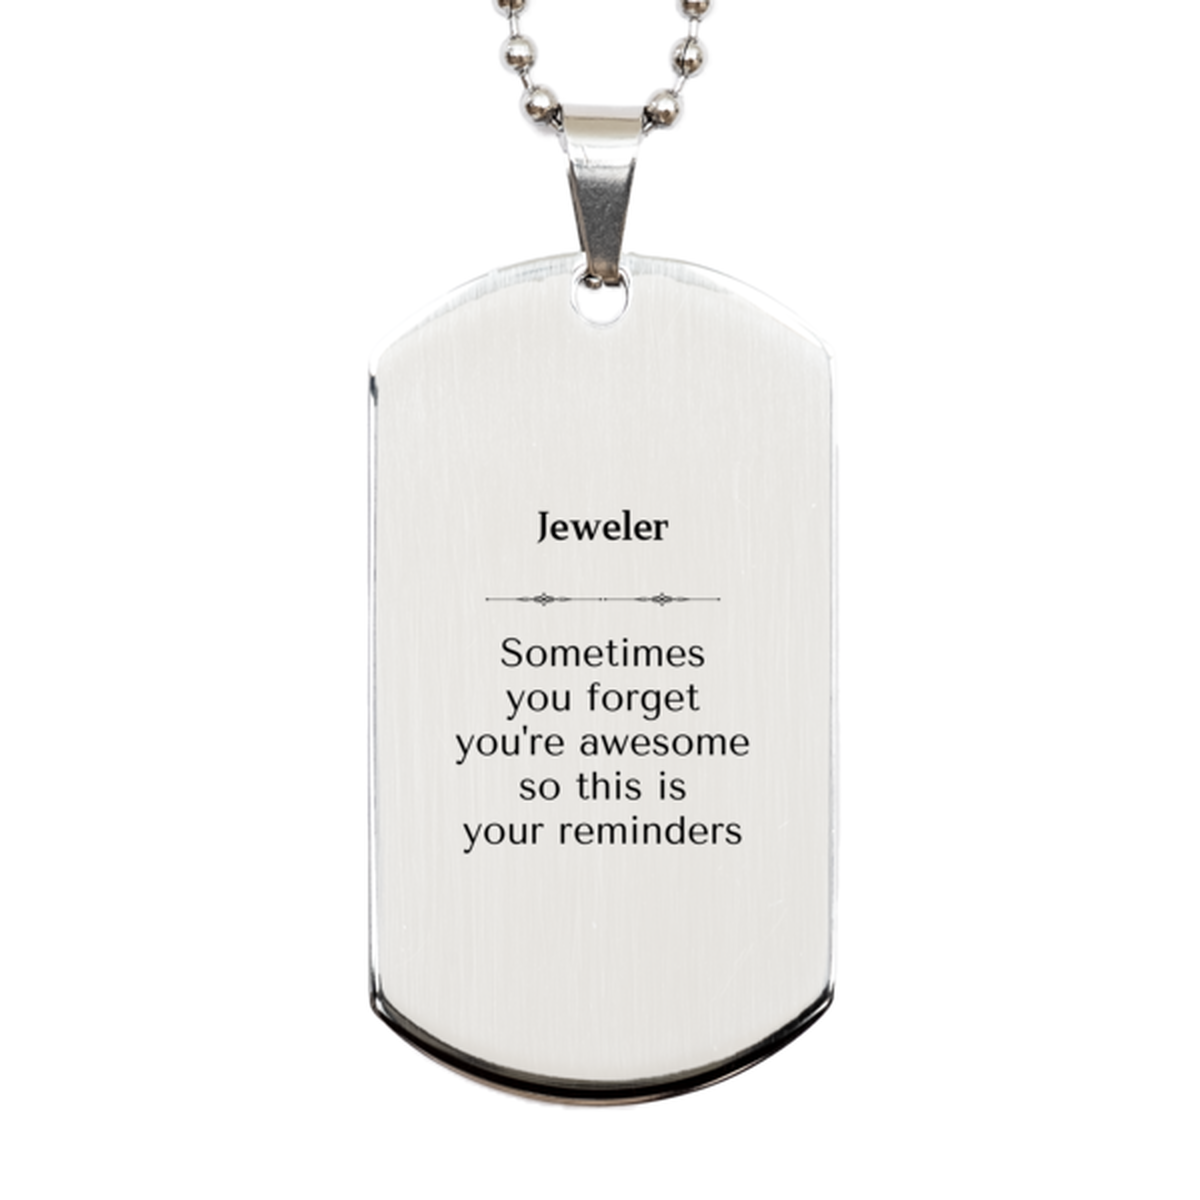 Sentimental Jeweler Silver Dog Tag, Jeweler Sometimes you forget you're awesome so this is your reminders, Graduation Christmas Birthday Gifts for Jeweler, Men, Women, Coworkers